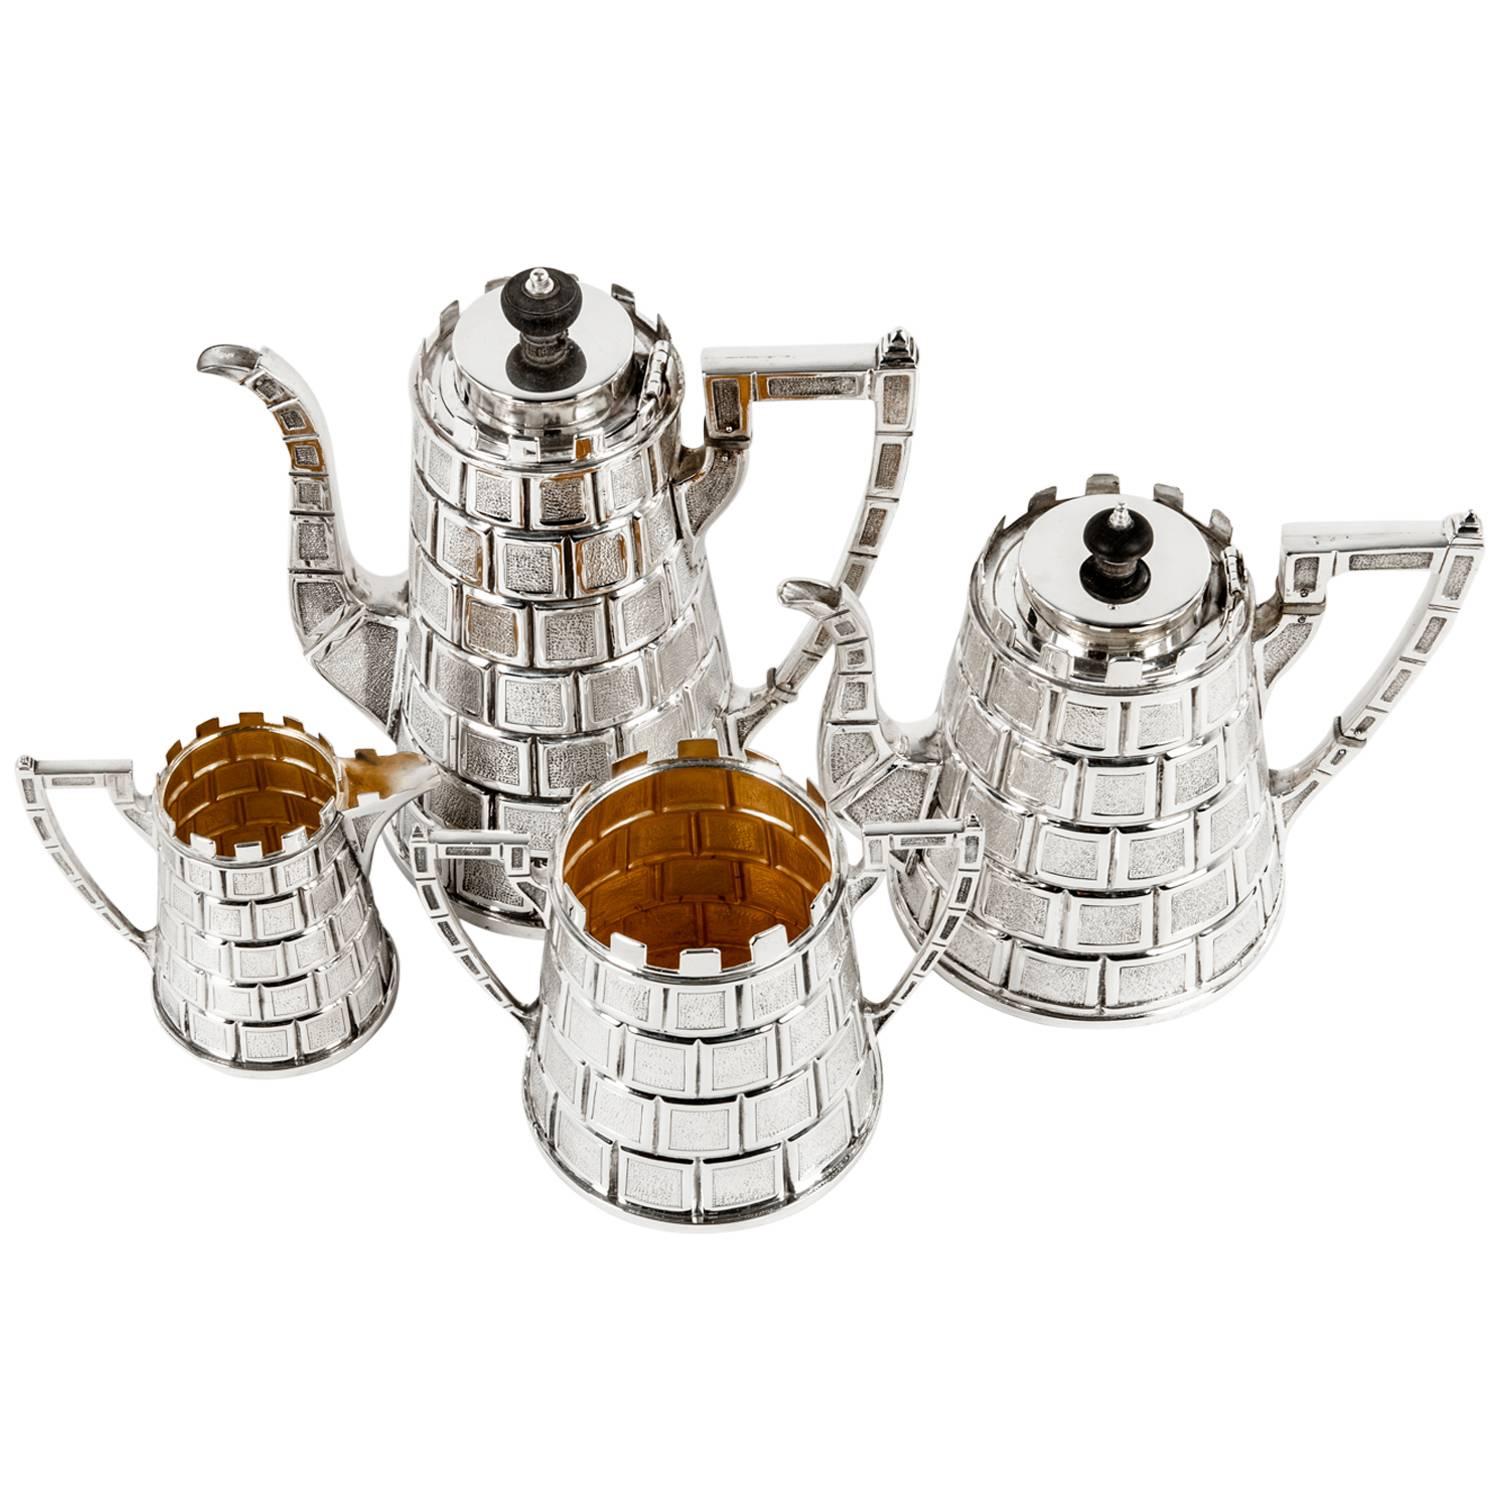 Antique English Four-Piece Tea and Coffee Set, with Registry Mark for 1877